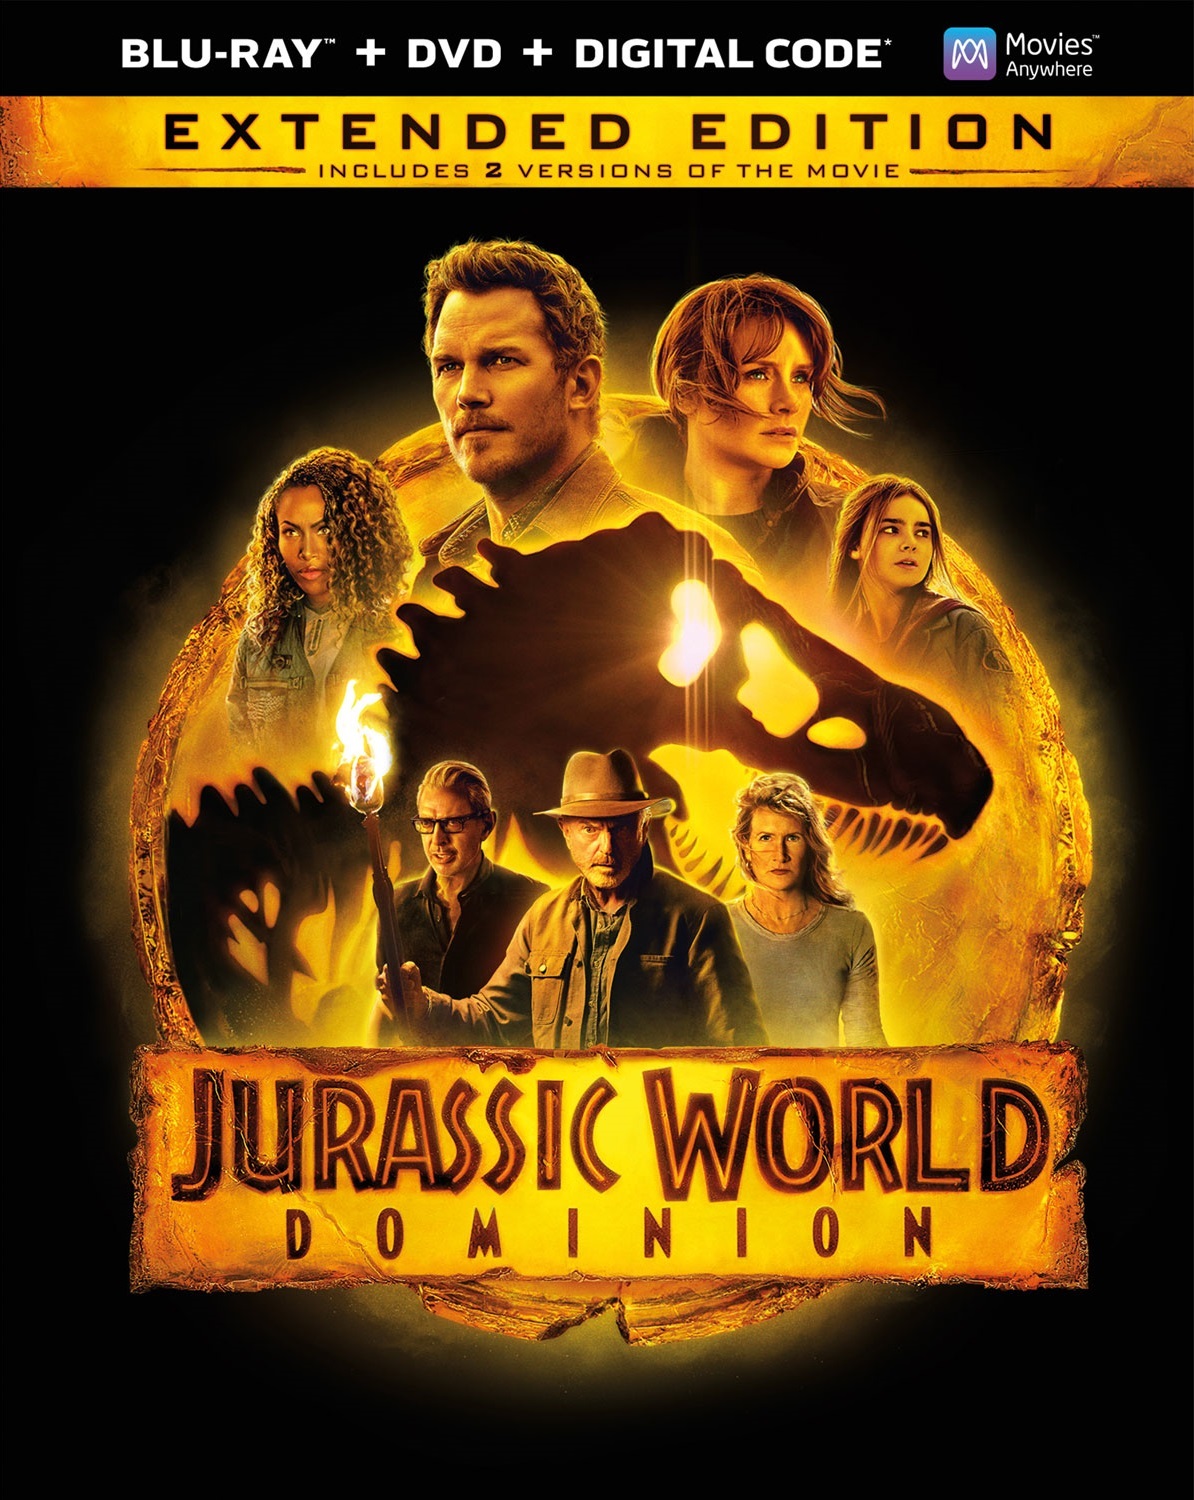 jurassic - Jurassic World Dominion (2022) [Theatrical and Extended Edition] Jurassic World: Dominio (2022) [Versión de Teatro y Extendida] [DTS-HD HRA 7.1 + SUP] [Blu Ray] 310940_front